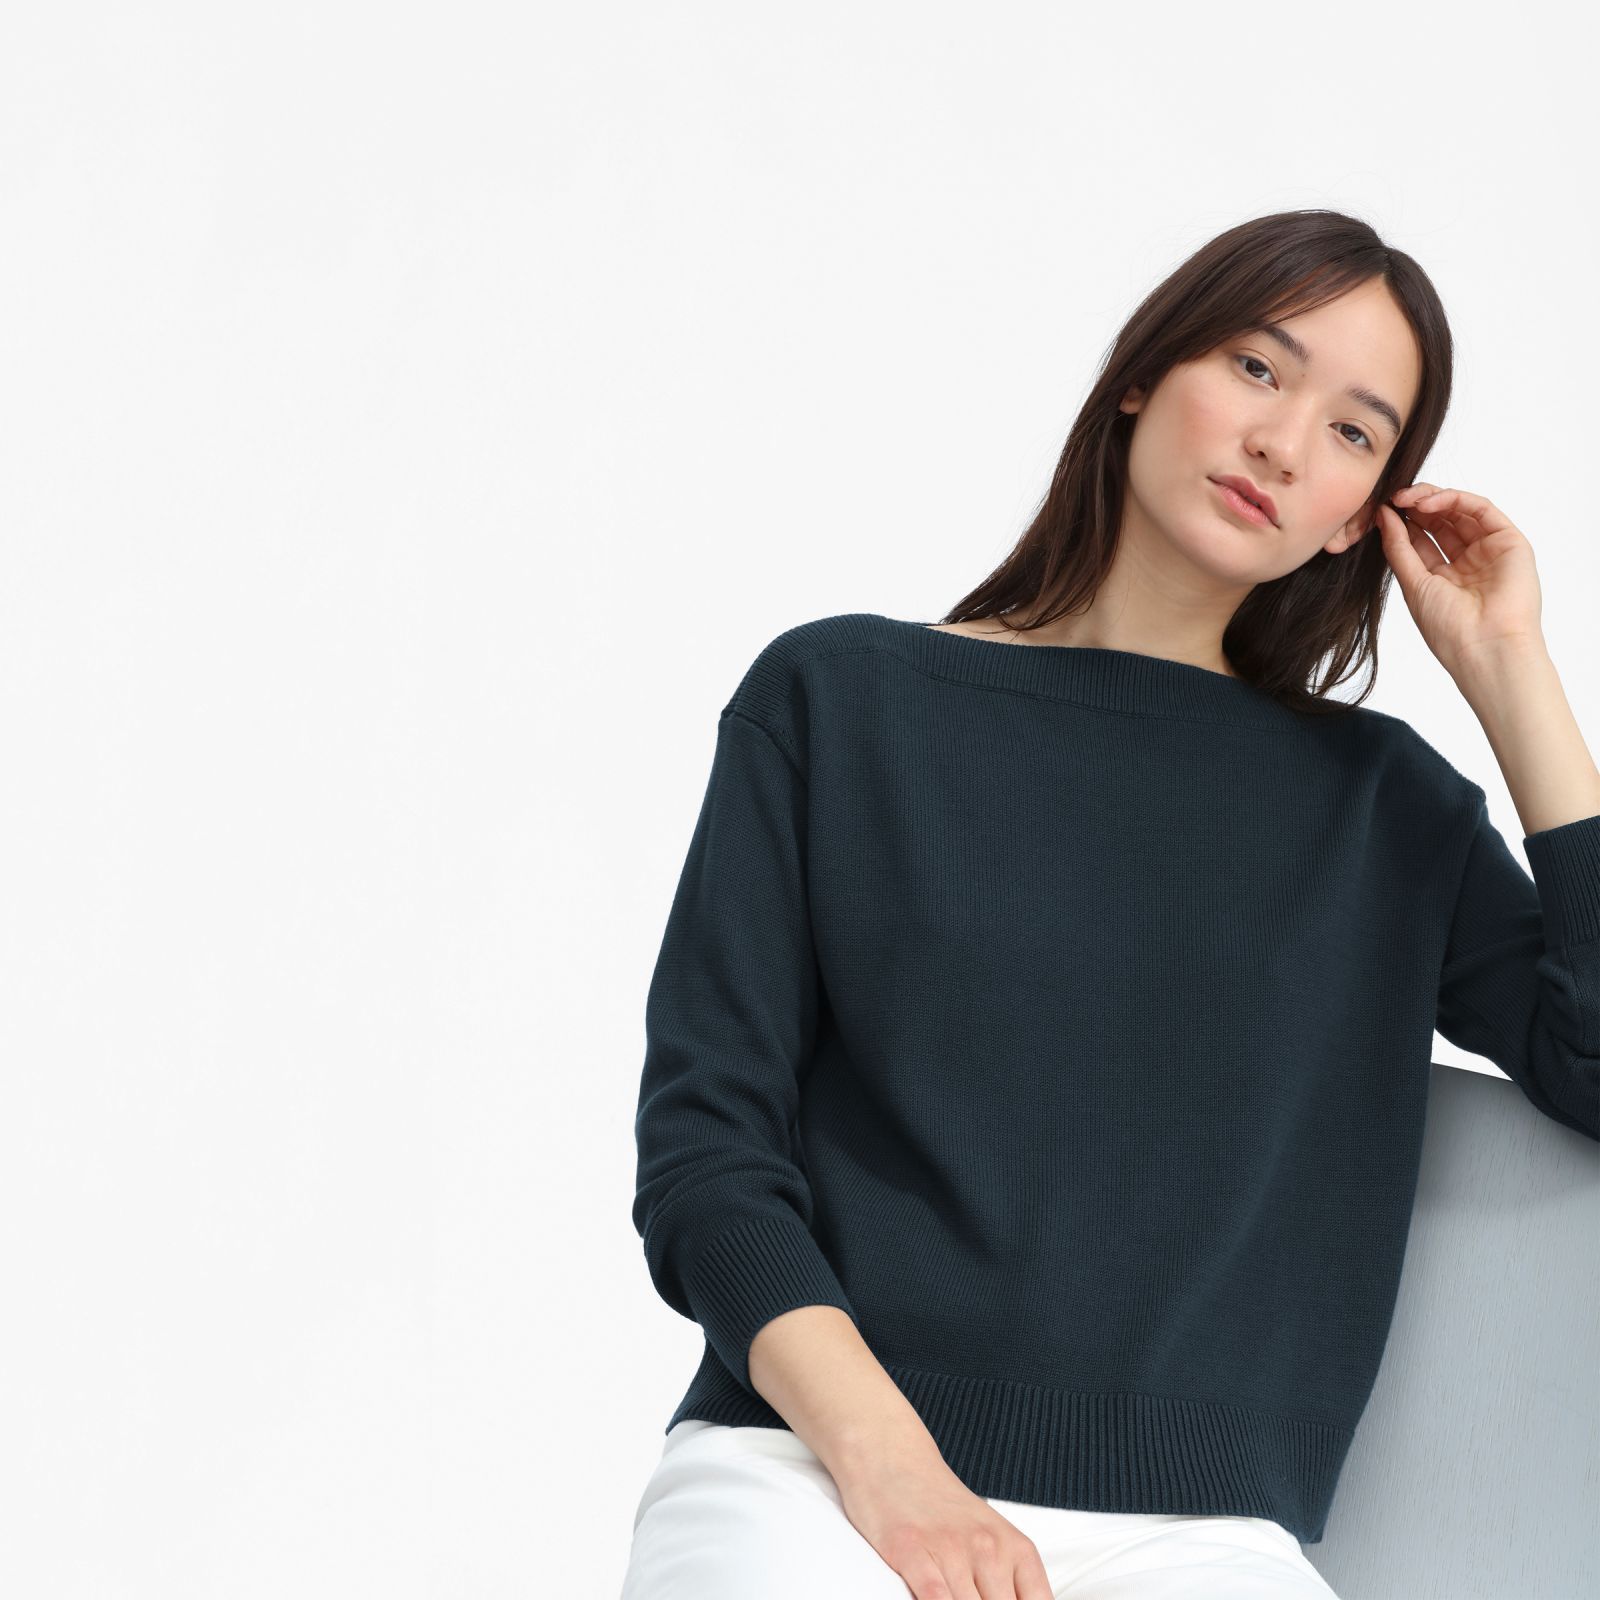 Women's Soft Cotton Boatneck Sweater by Everlane in Black, Size XS | Everlane